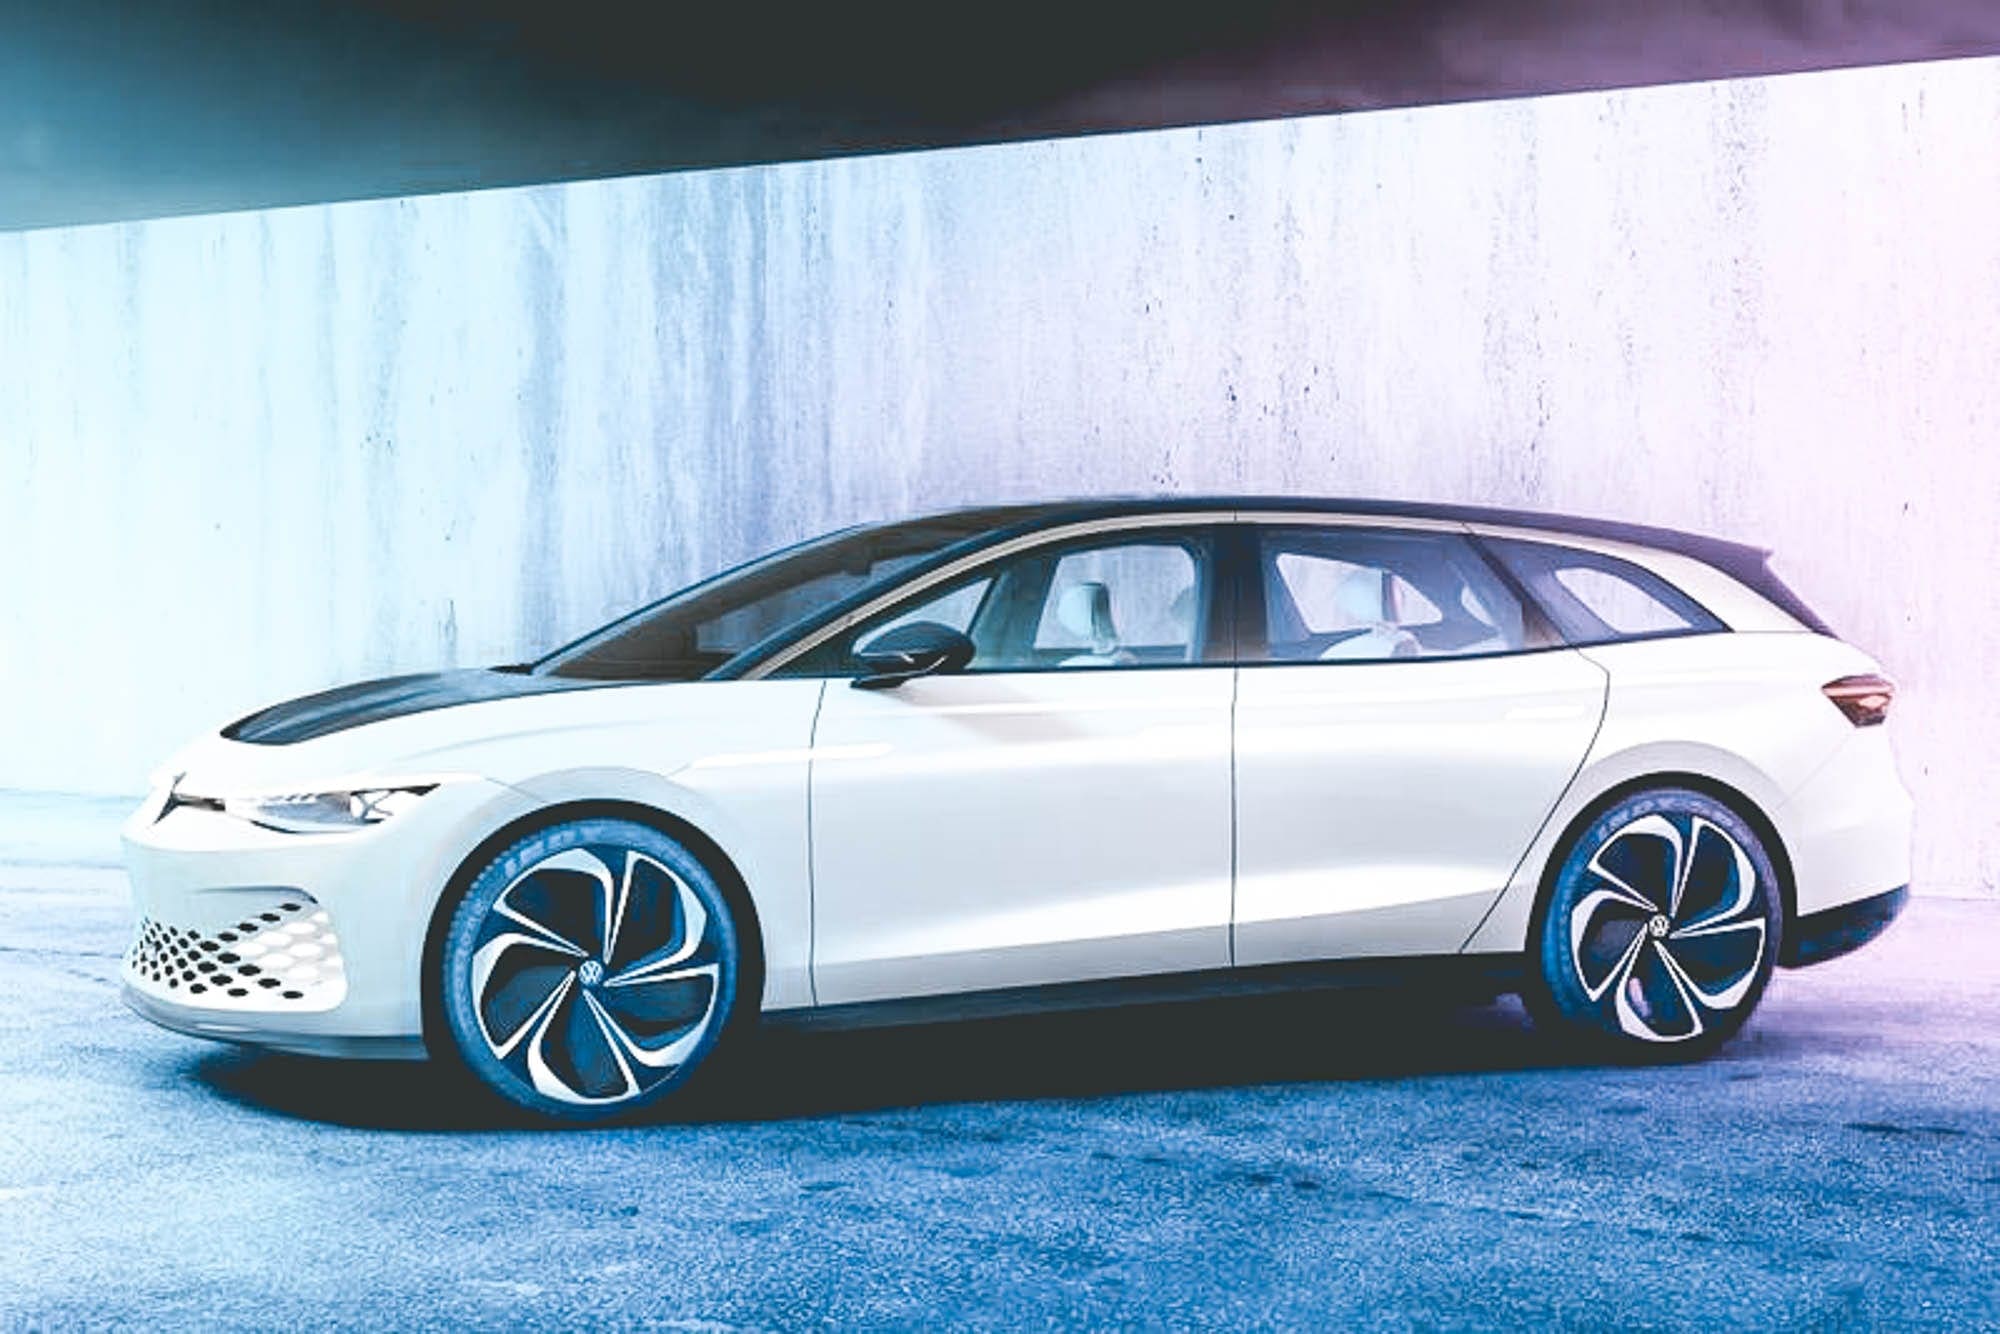 Volkswagen ID Space vizzion - Concepts cars 2019